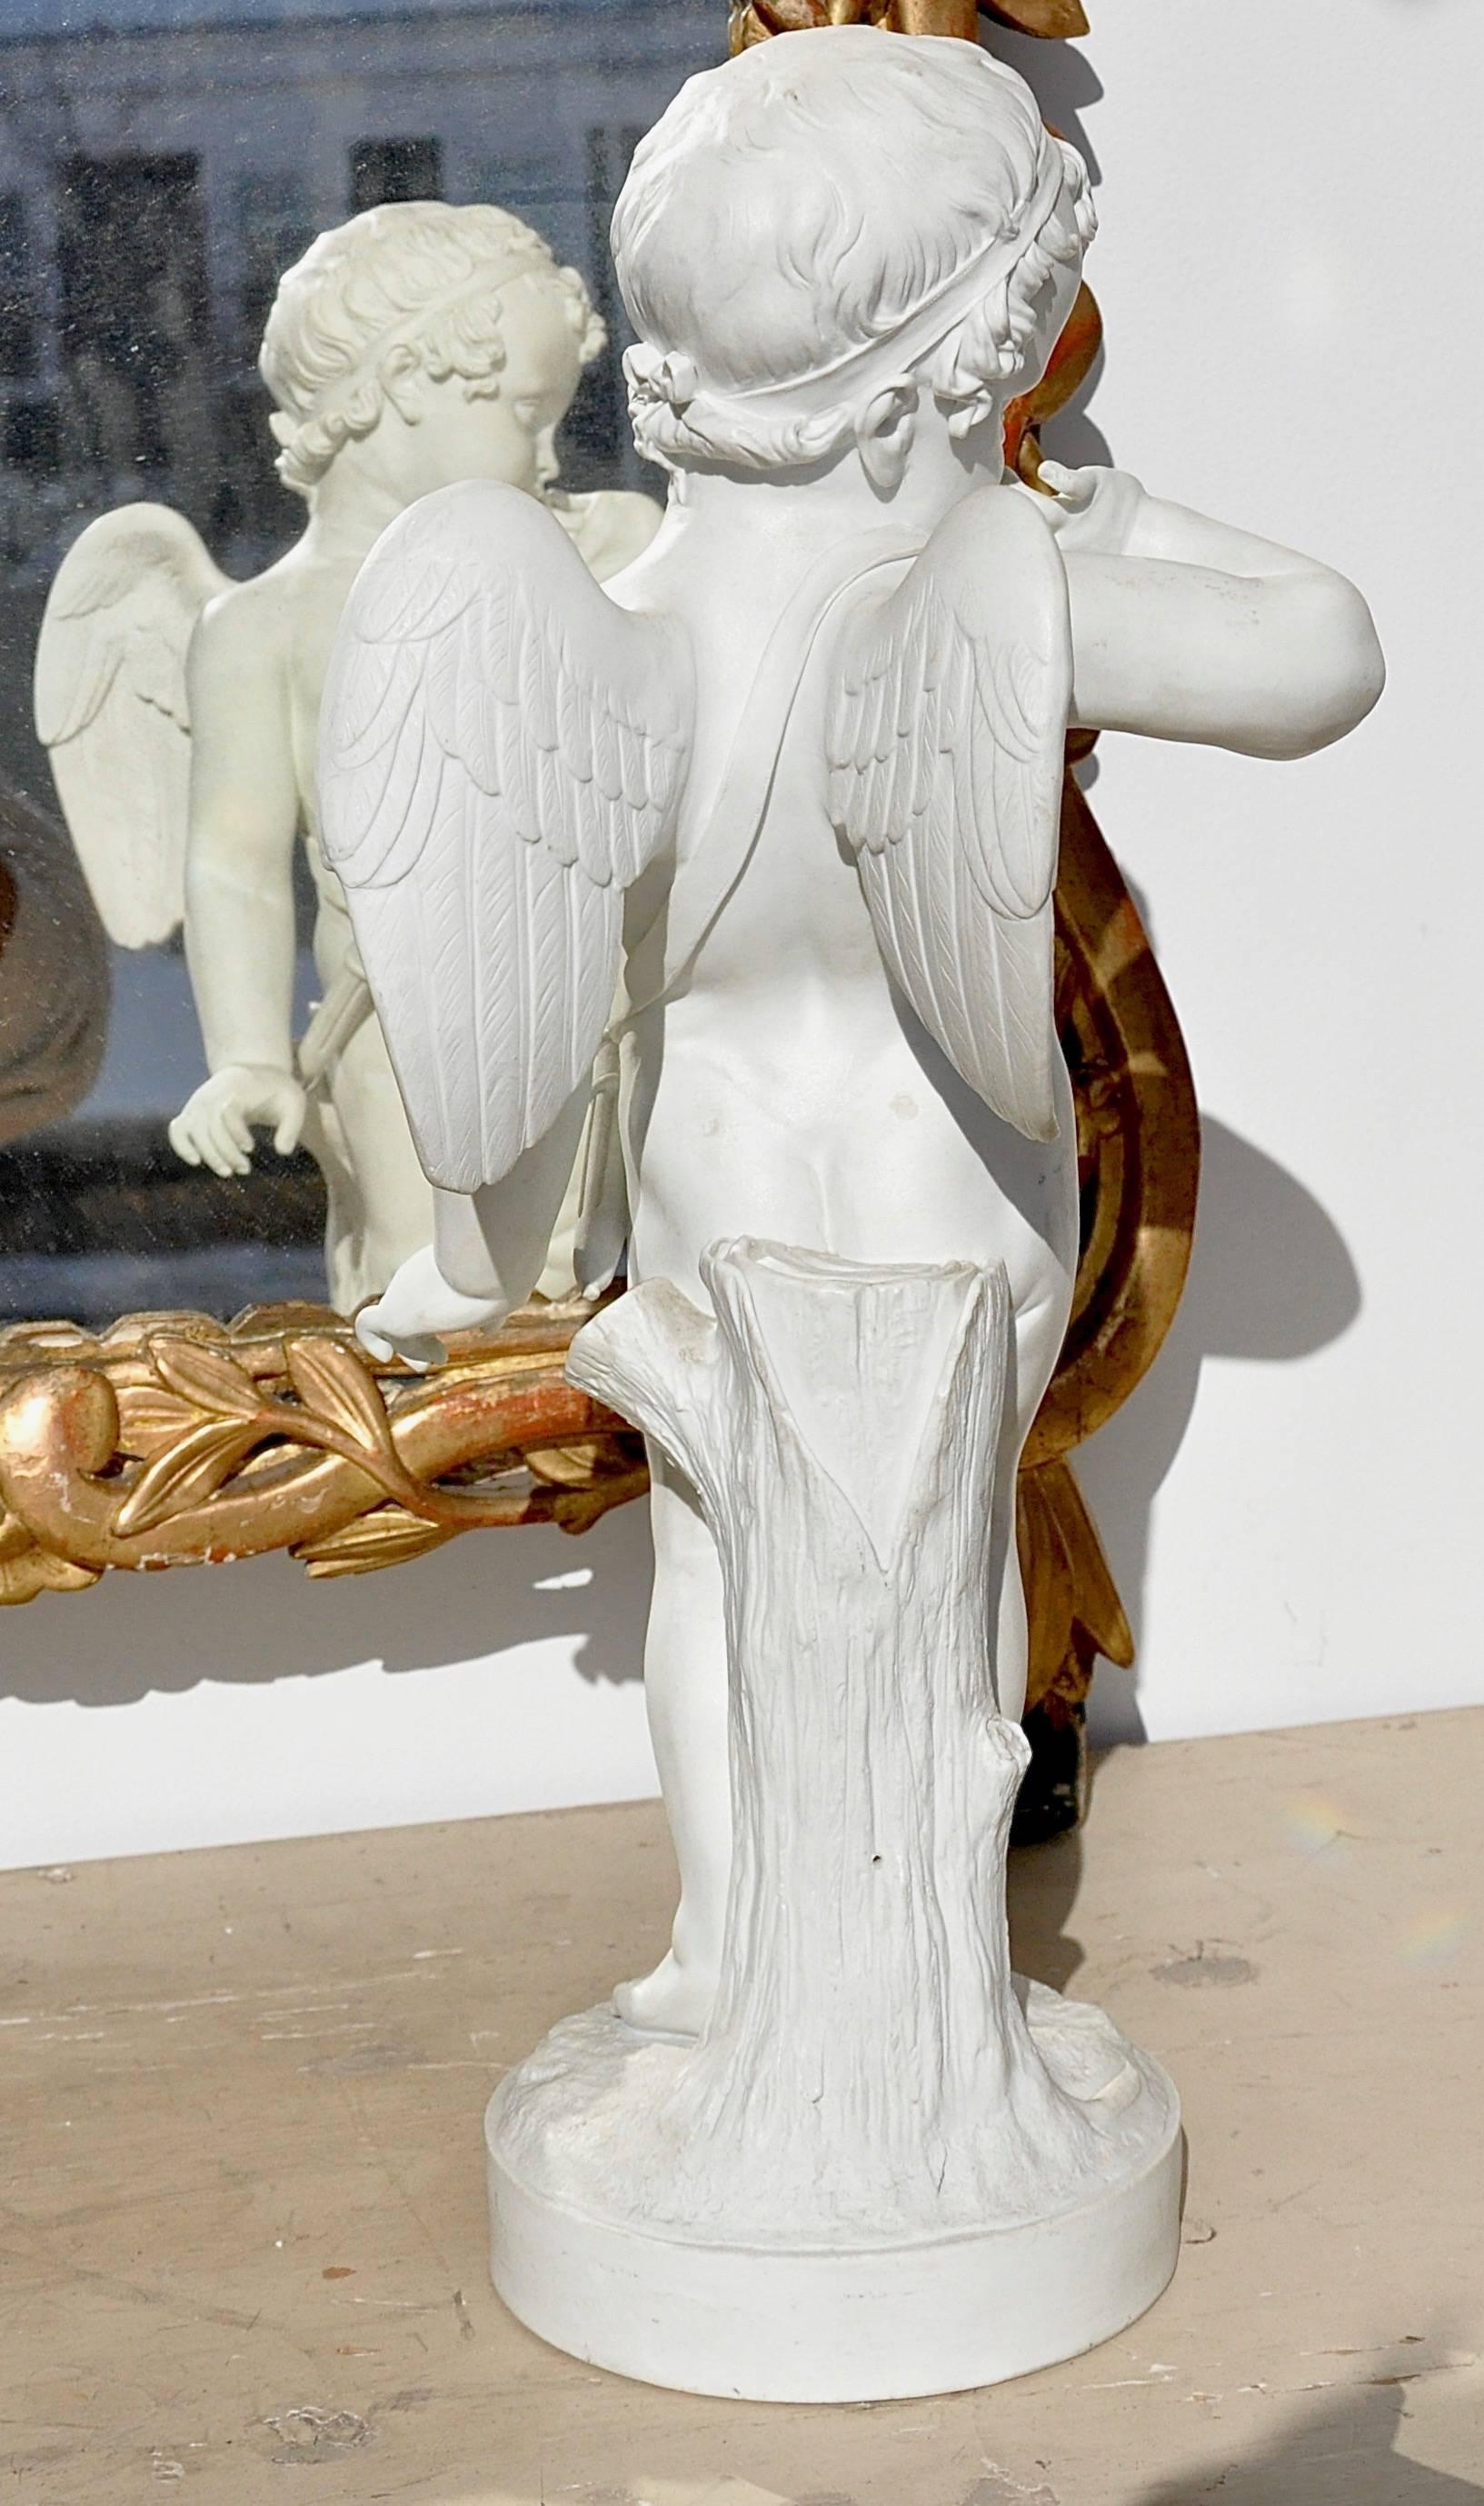 Large realistically sculpted bisque porcelain figure of cupid with arrows.

Attributed to the Paris Manufacturer, Dihl and Guerhard, which was patronized by Josephine Bonaparte
among others during the late 18th and into the early 19th century.
 